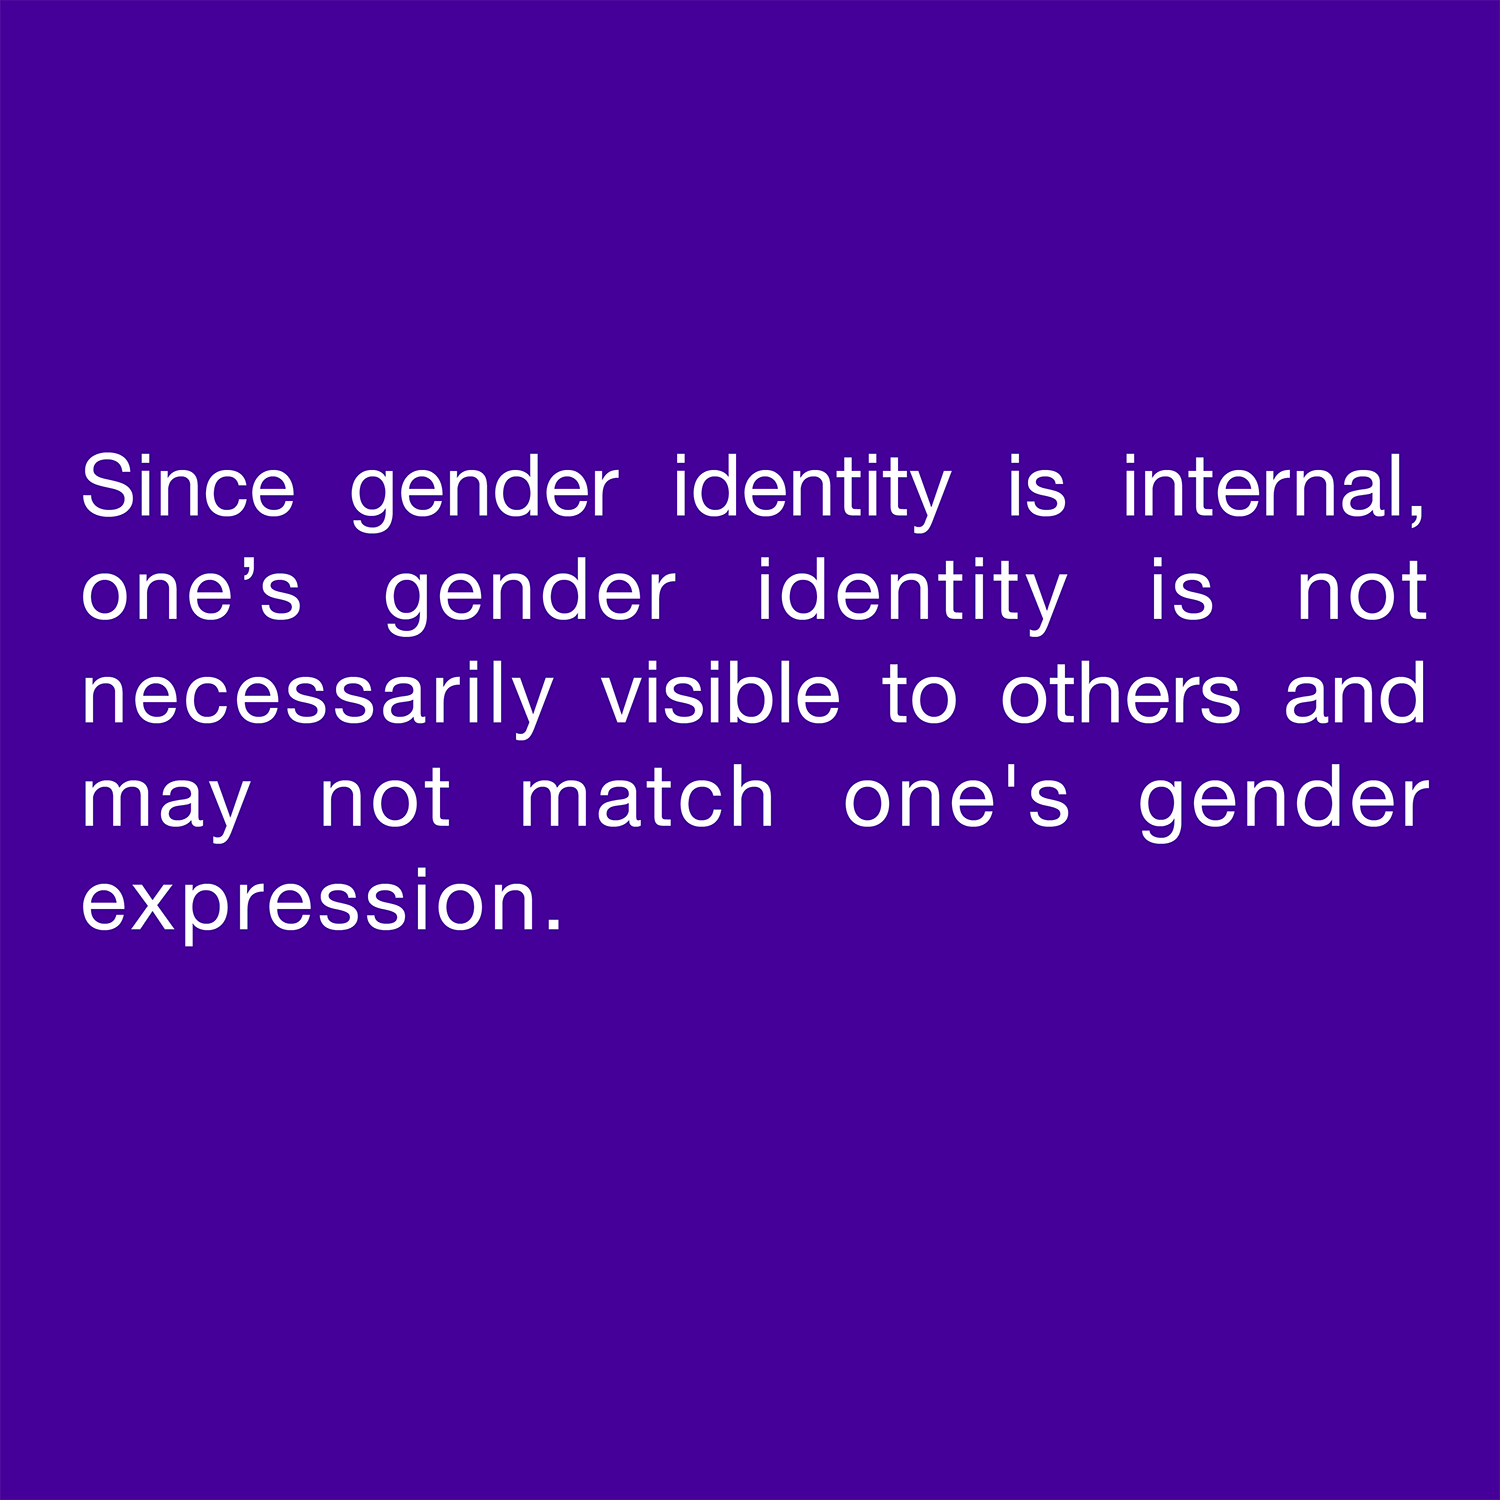  Since gender identity is internal, one’s gender identity is not necessarily visible to others and may not match one's gender expression. 